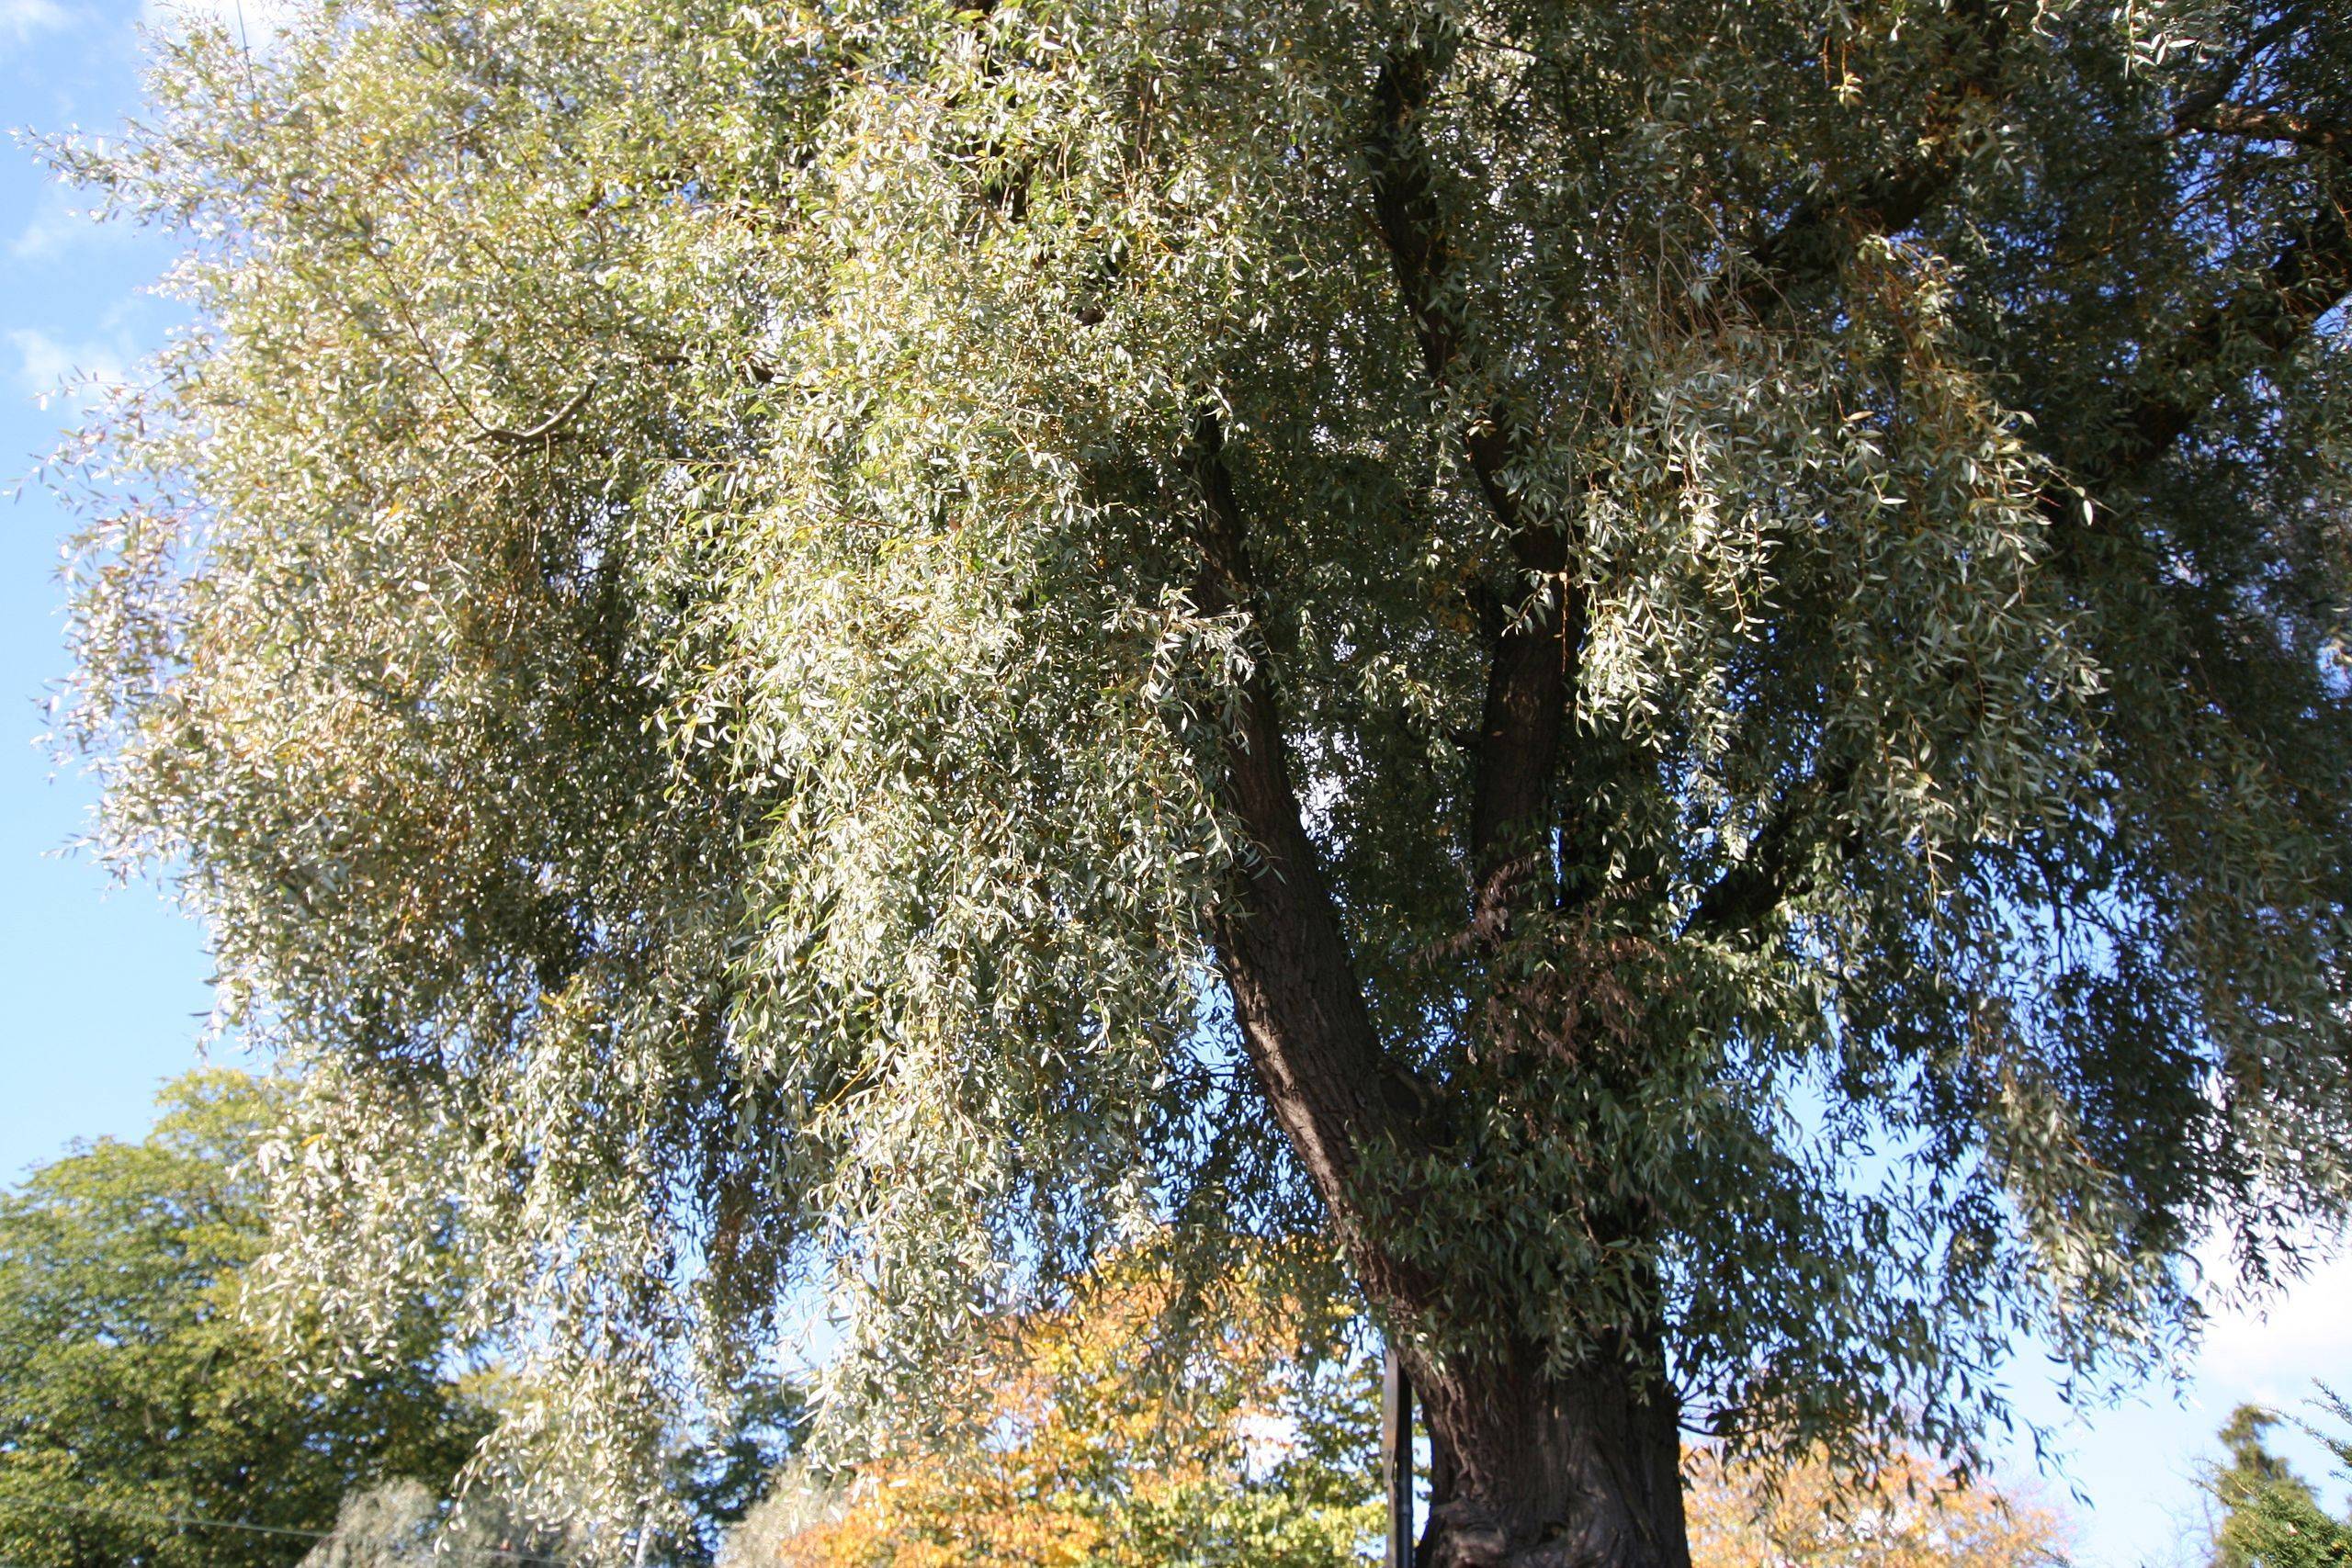 gold-green foliage with brown branches and trunk